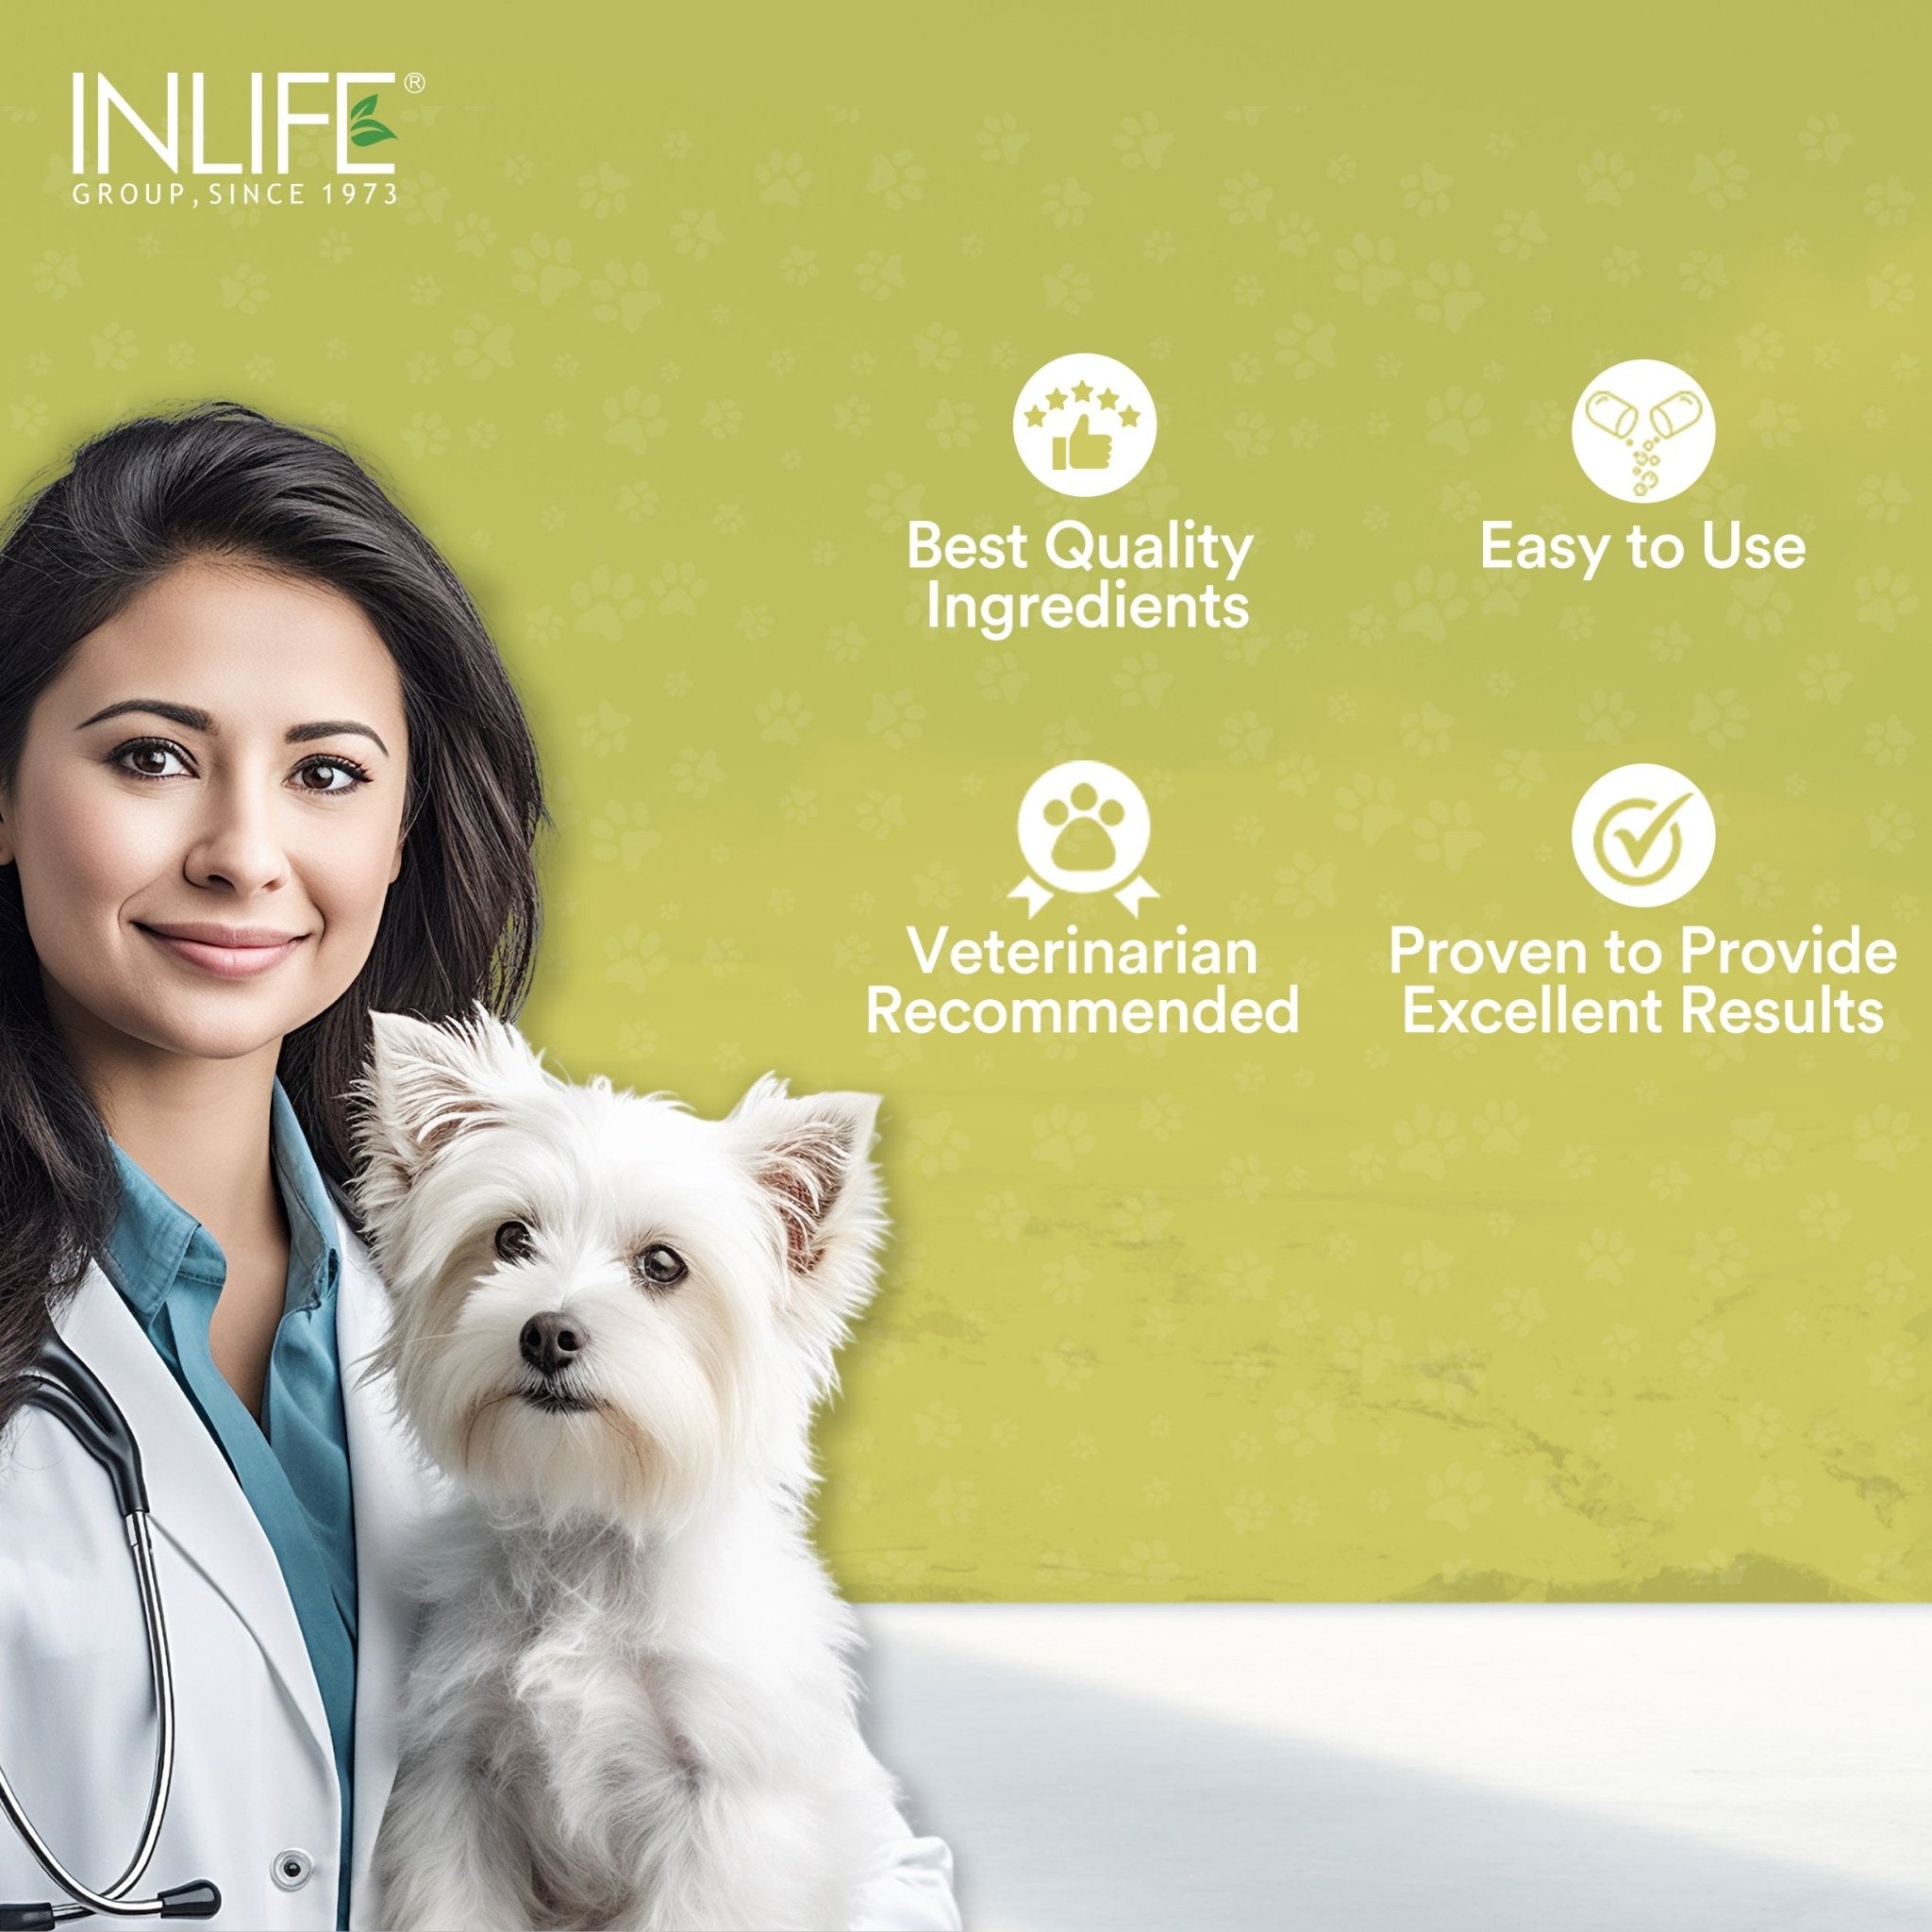 INLIFE Multivitamins Supplement for Dogs for Healthy Growth, Skin & Coat - 60 Tablets - Inlife Pharma Private Limited